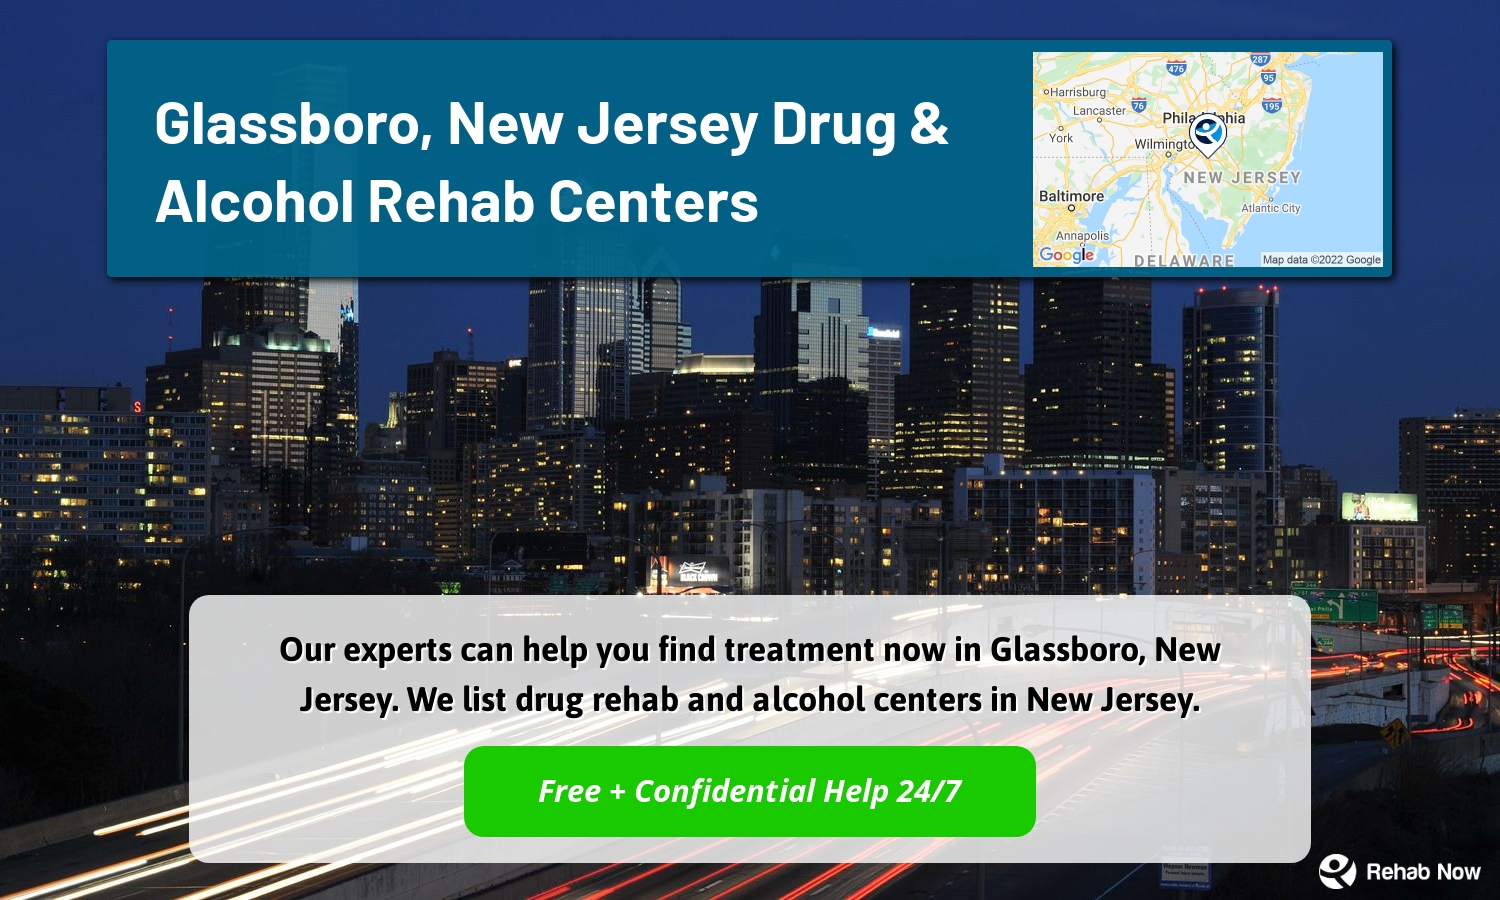 Our experts can help you find treatment now in Glassboro, New Jersey. We list drug rehab and alcohol centers in New Jersey.